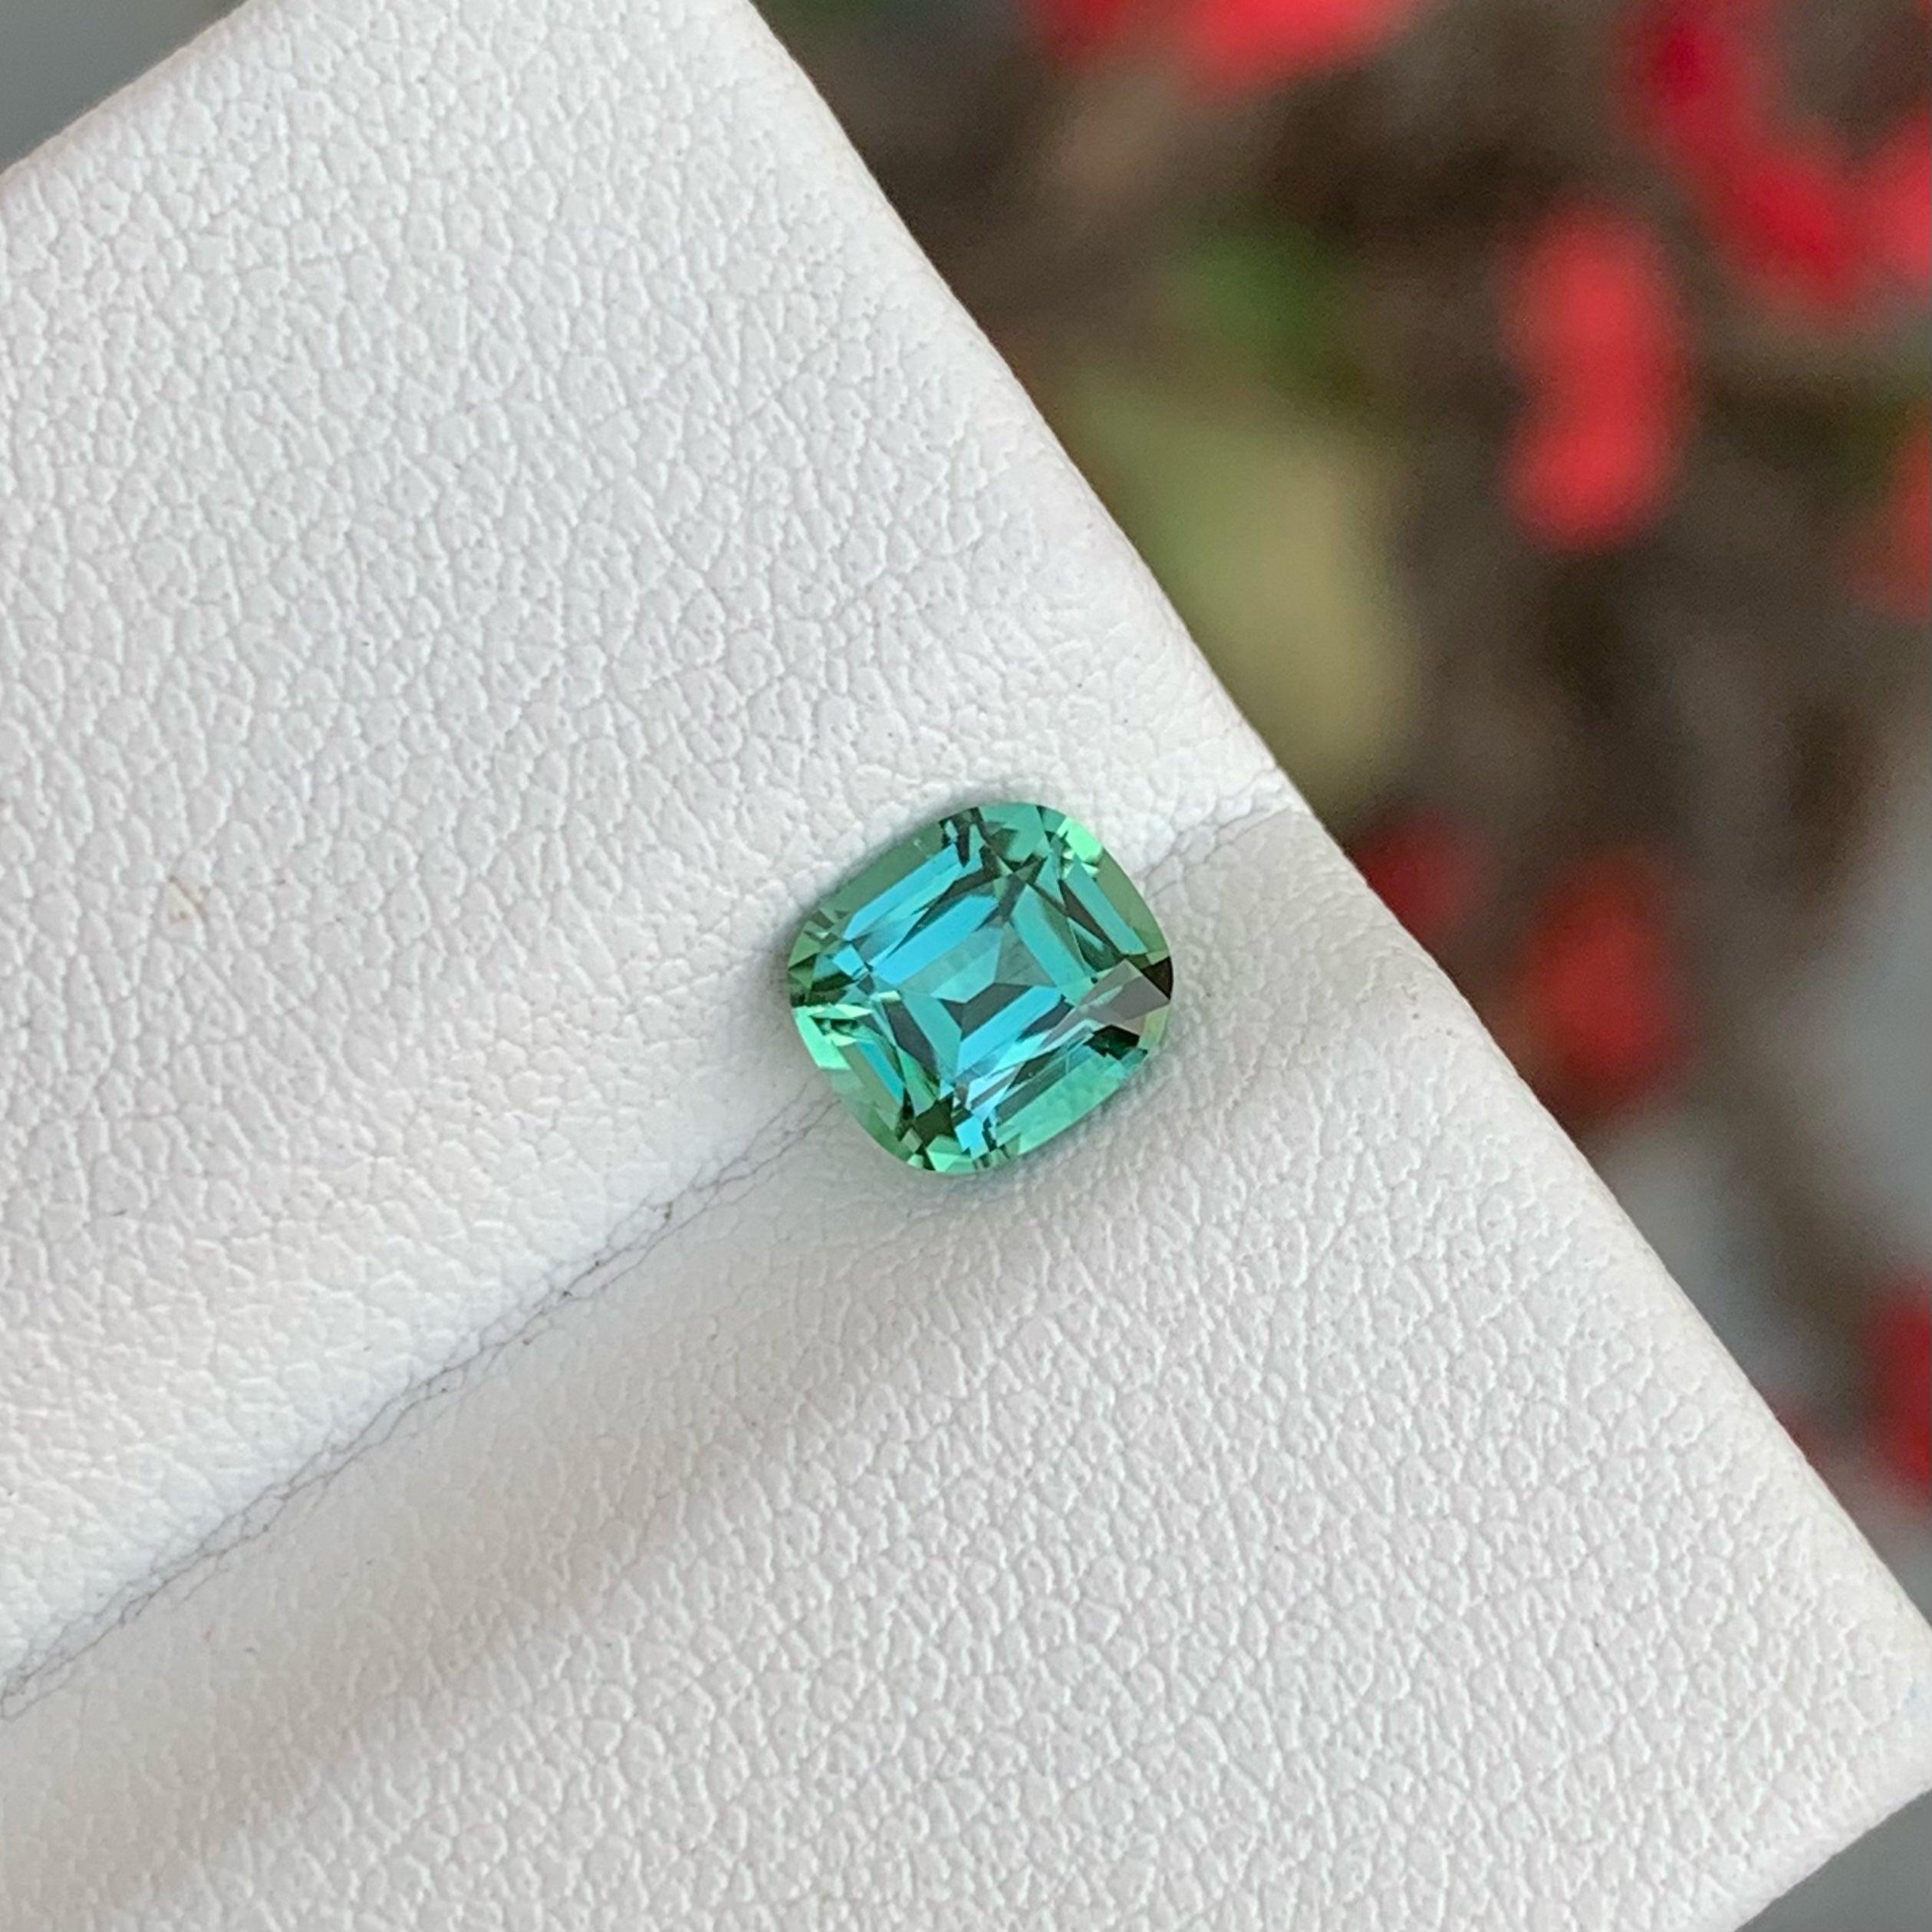 Excellent Mint Green Loose Tourmaline Stone, Available For Sale At Wholesale Price Natural High Quality 1.05 Carats Eye Clean Clarity Untreated Tourmaline From Afghanistan.

Product Information:
GEMSTONE TYPE:	Excellent Mint Green Loose Tourmaline